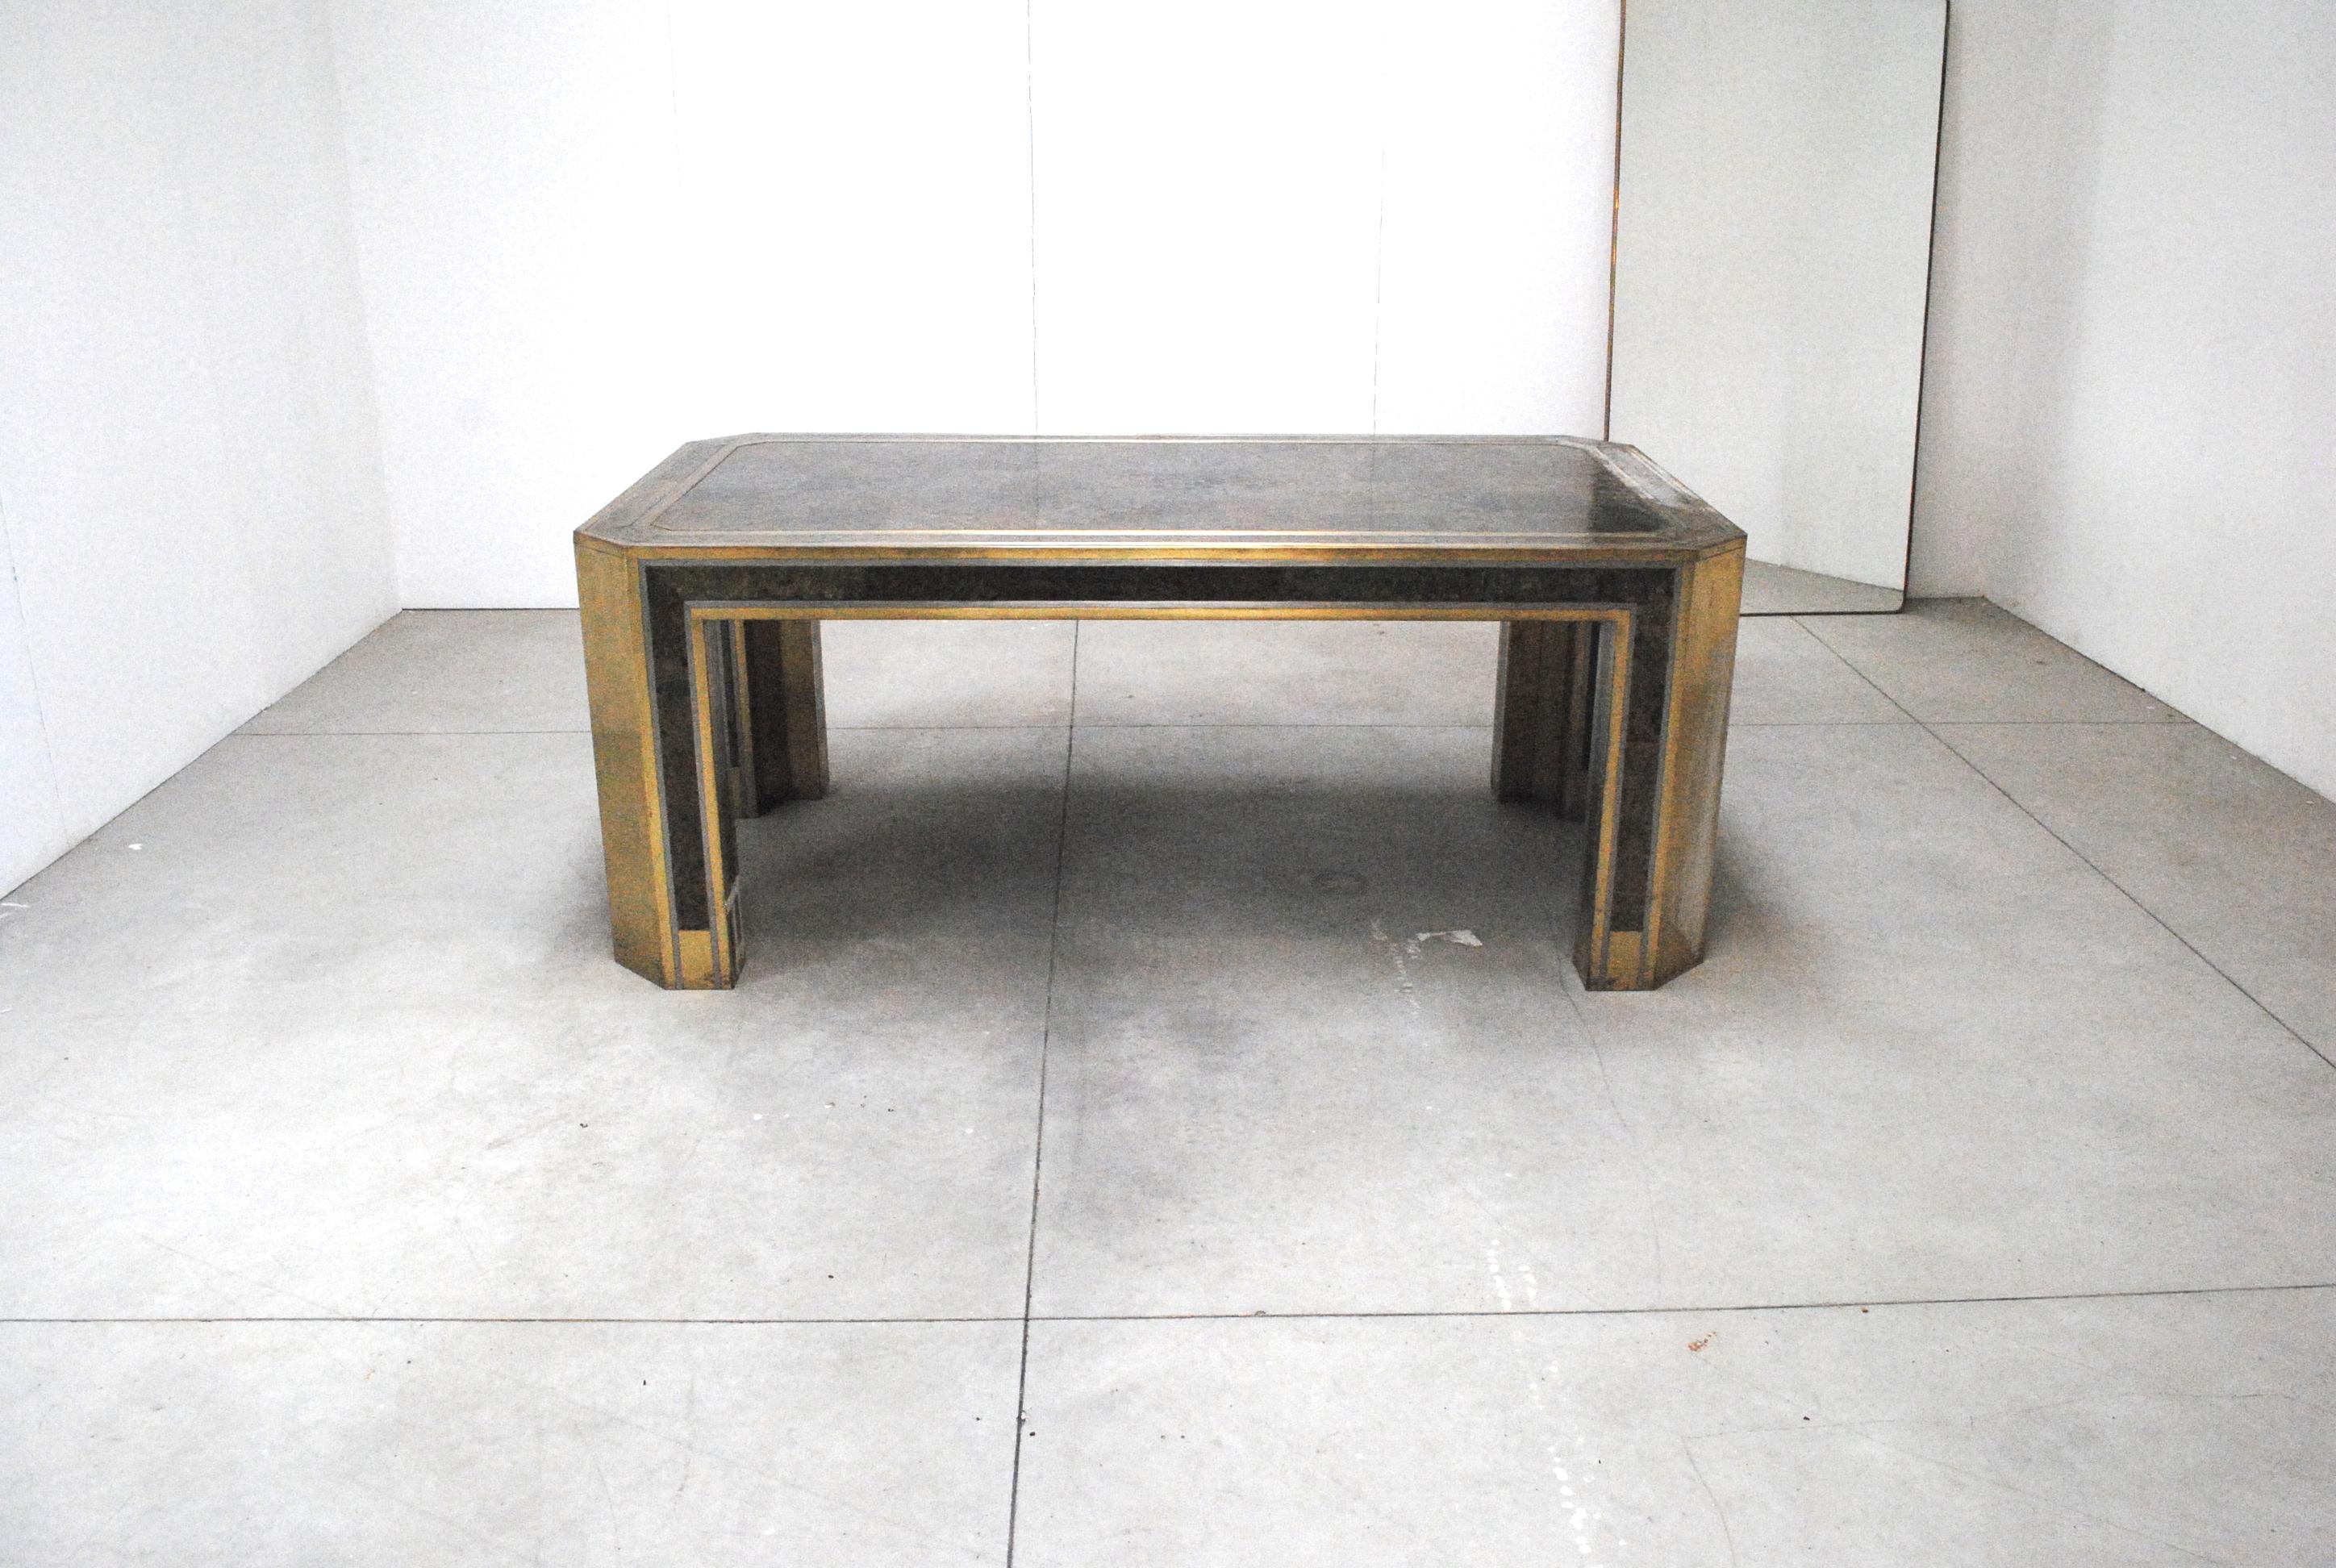 Fantastic and extra size table by Romeo Rega in brass and real turtle skin from 1970s.
Italian designer Romeo Rega is one of several 1970s-era designers that are associated with a combination of modernism and glamour in their furniture creations.